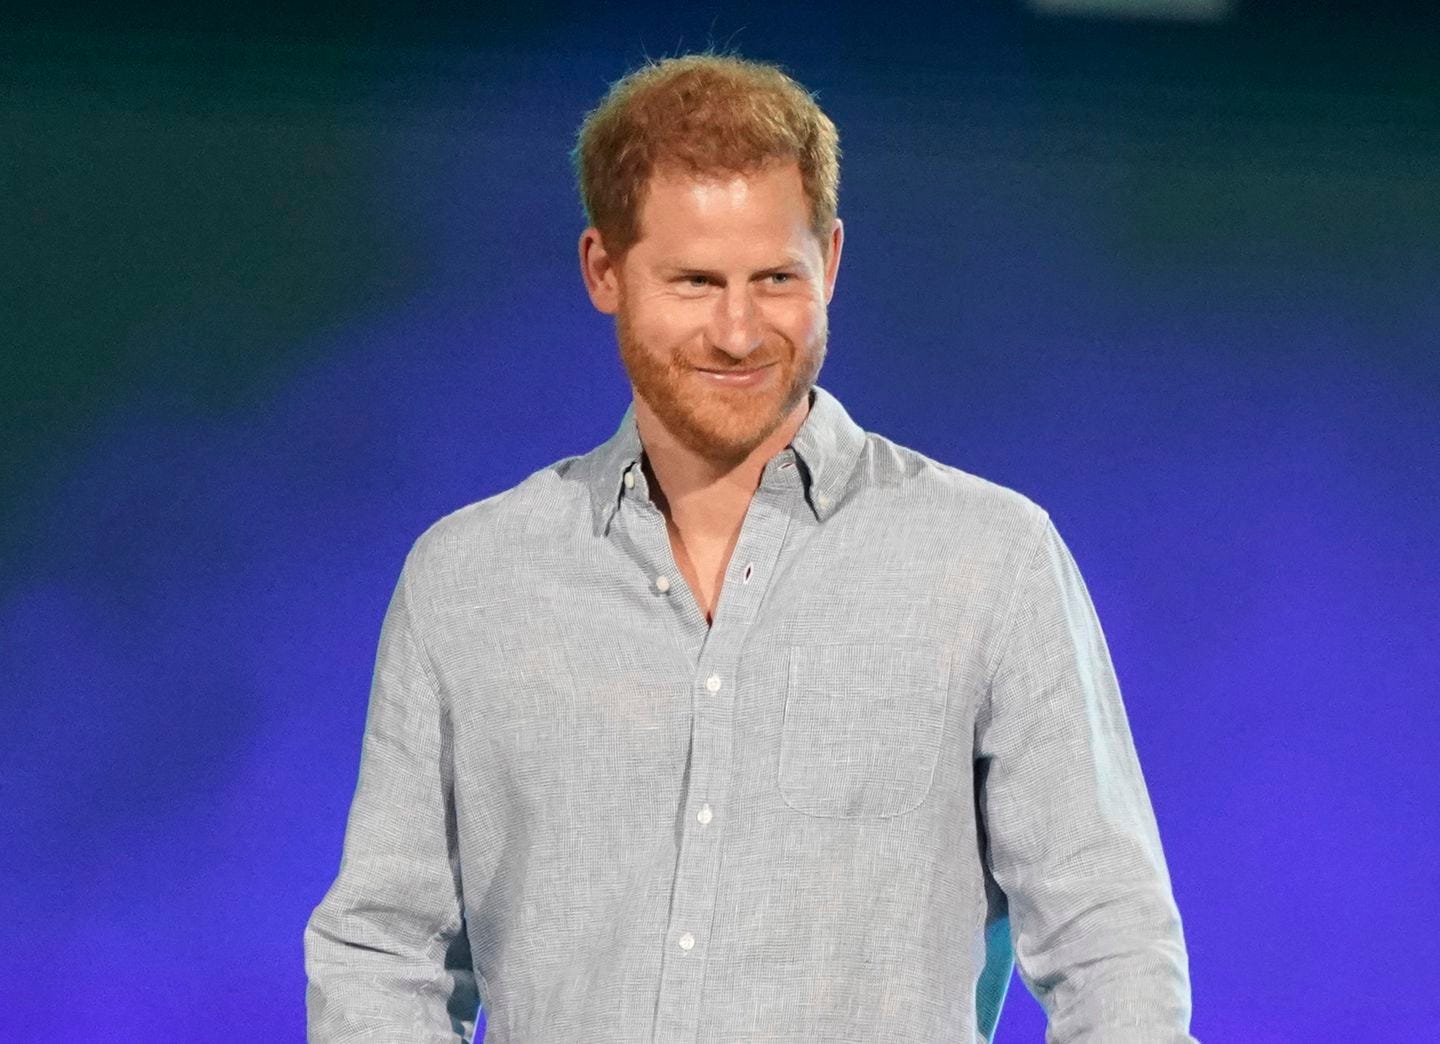 Prince Harry at "Vax Live: The Concert to Reunite the World" in Inglewood, Calif. on May 2. Prince Harry compared his royal experience to being on “The Truman Show” and “living in a zoo.” He said he contemplated quitting royal life on several occasions during his 20s in a Thursday episode of the “Armchair Expert” podcast.